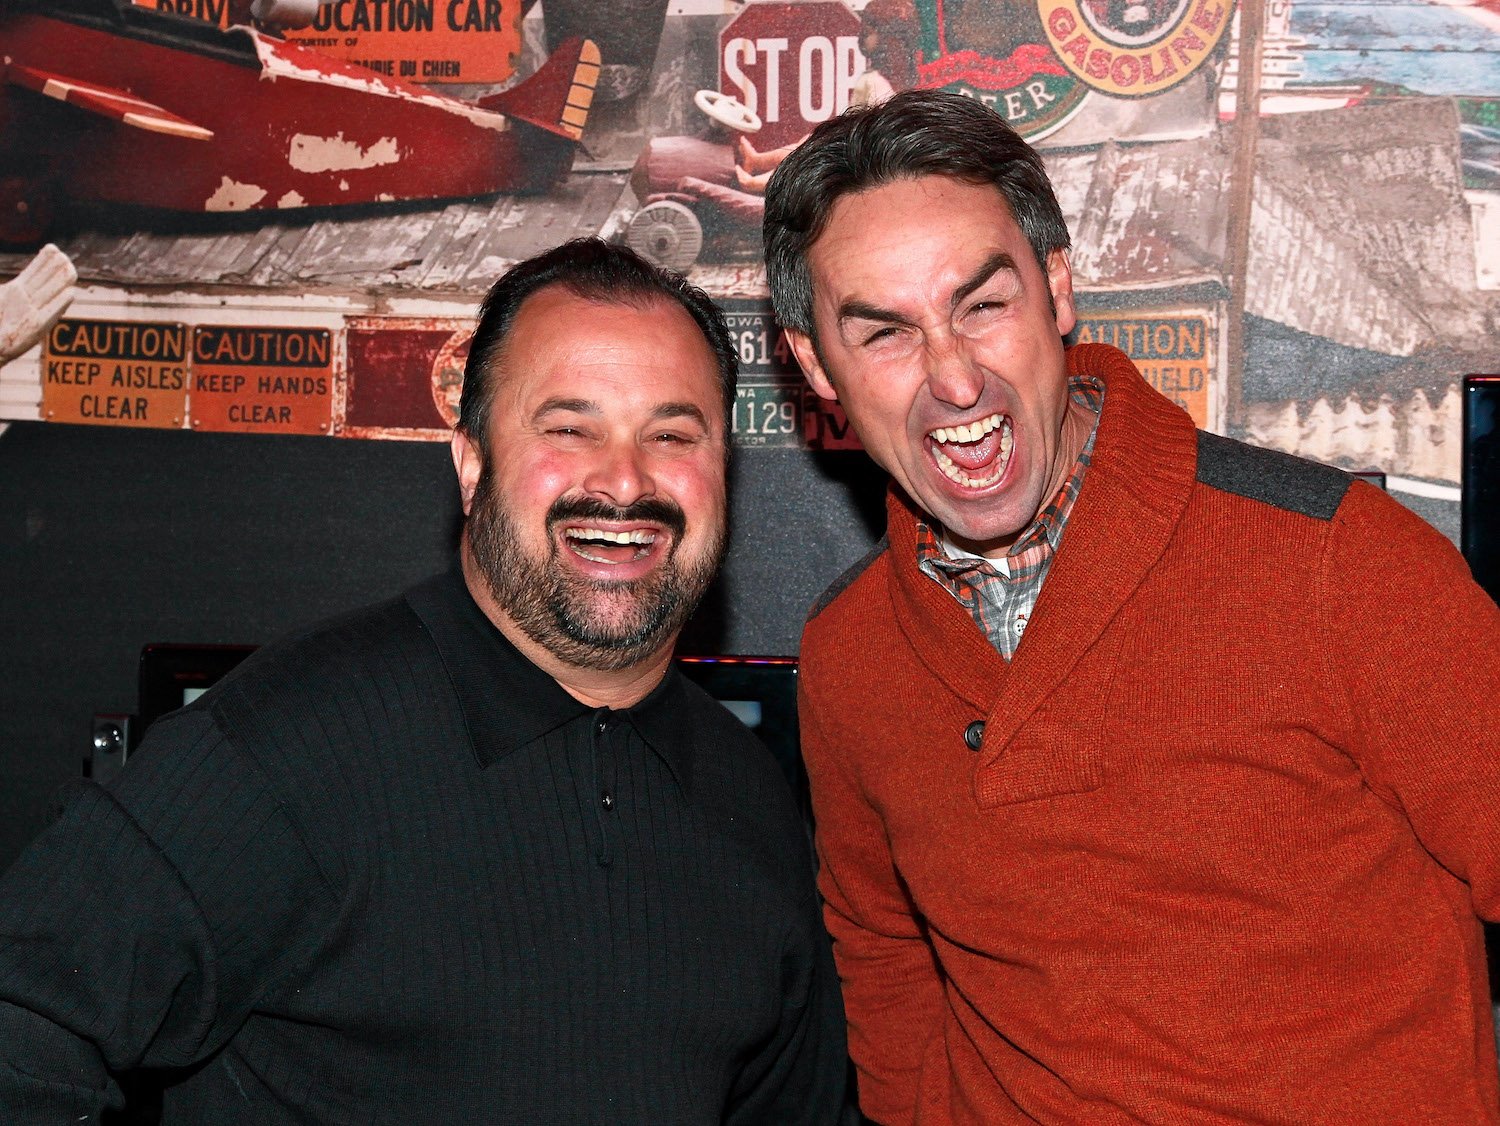 Frank Fritz and Mike Wolfe from 'American Pickers' standing next to each other and smiling